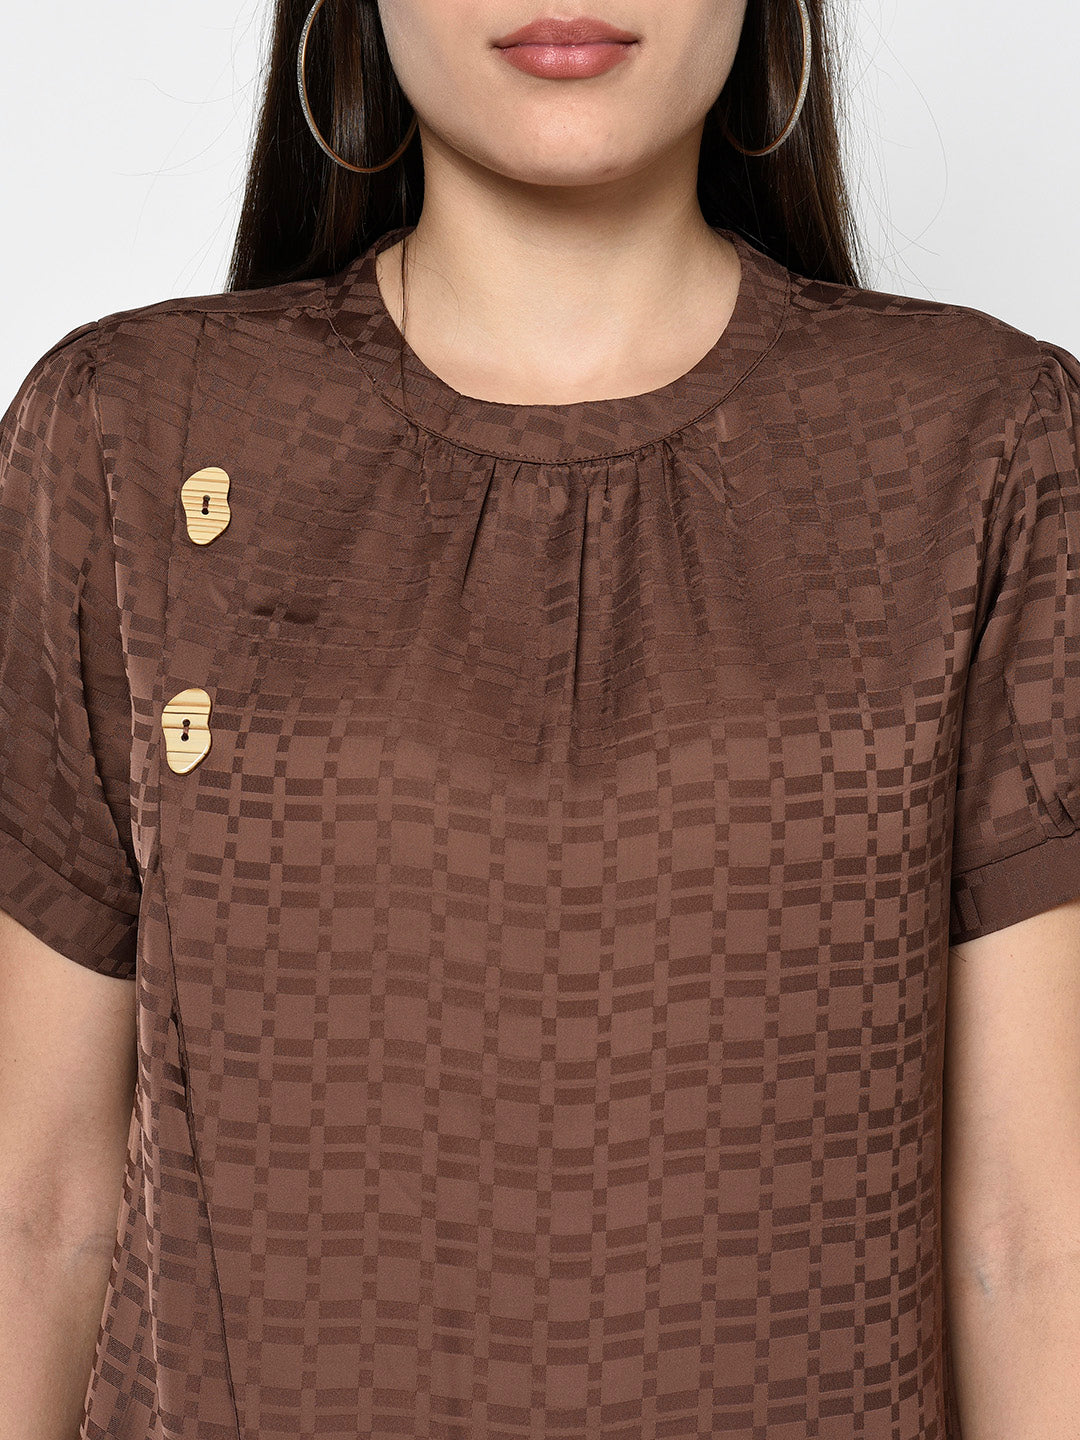 Brown Round Neck Woven Top